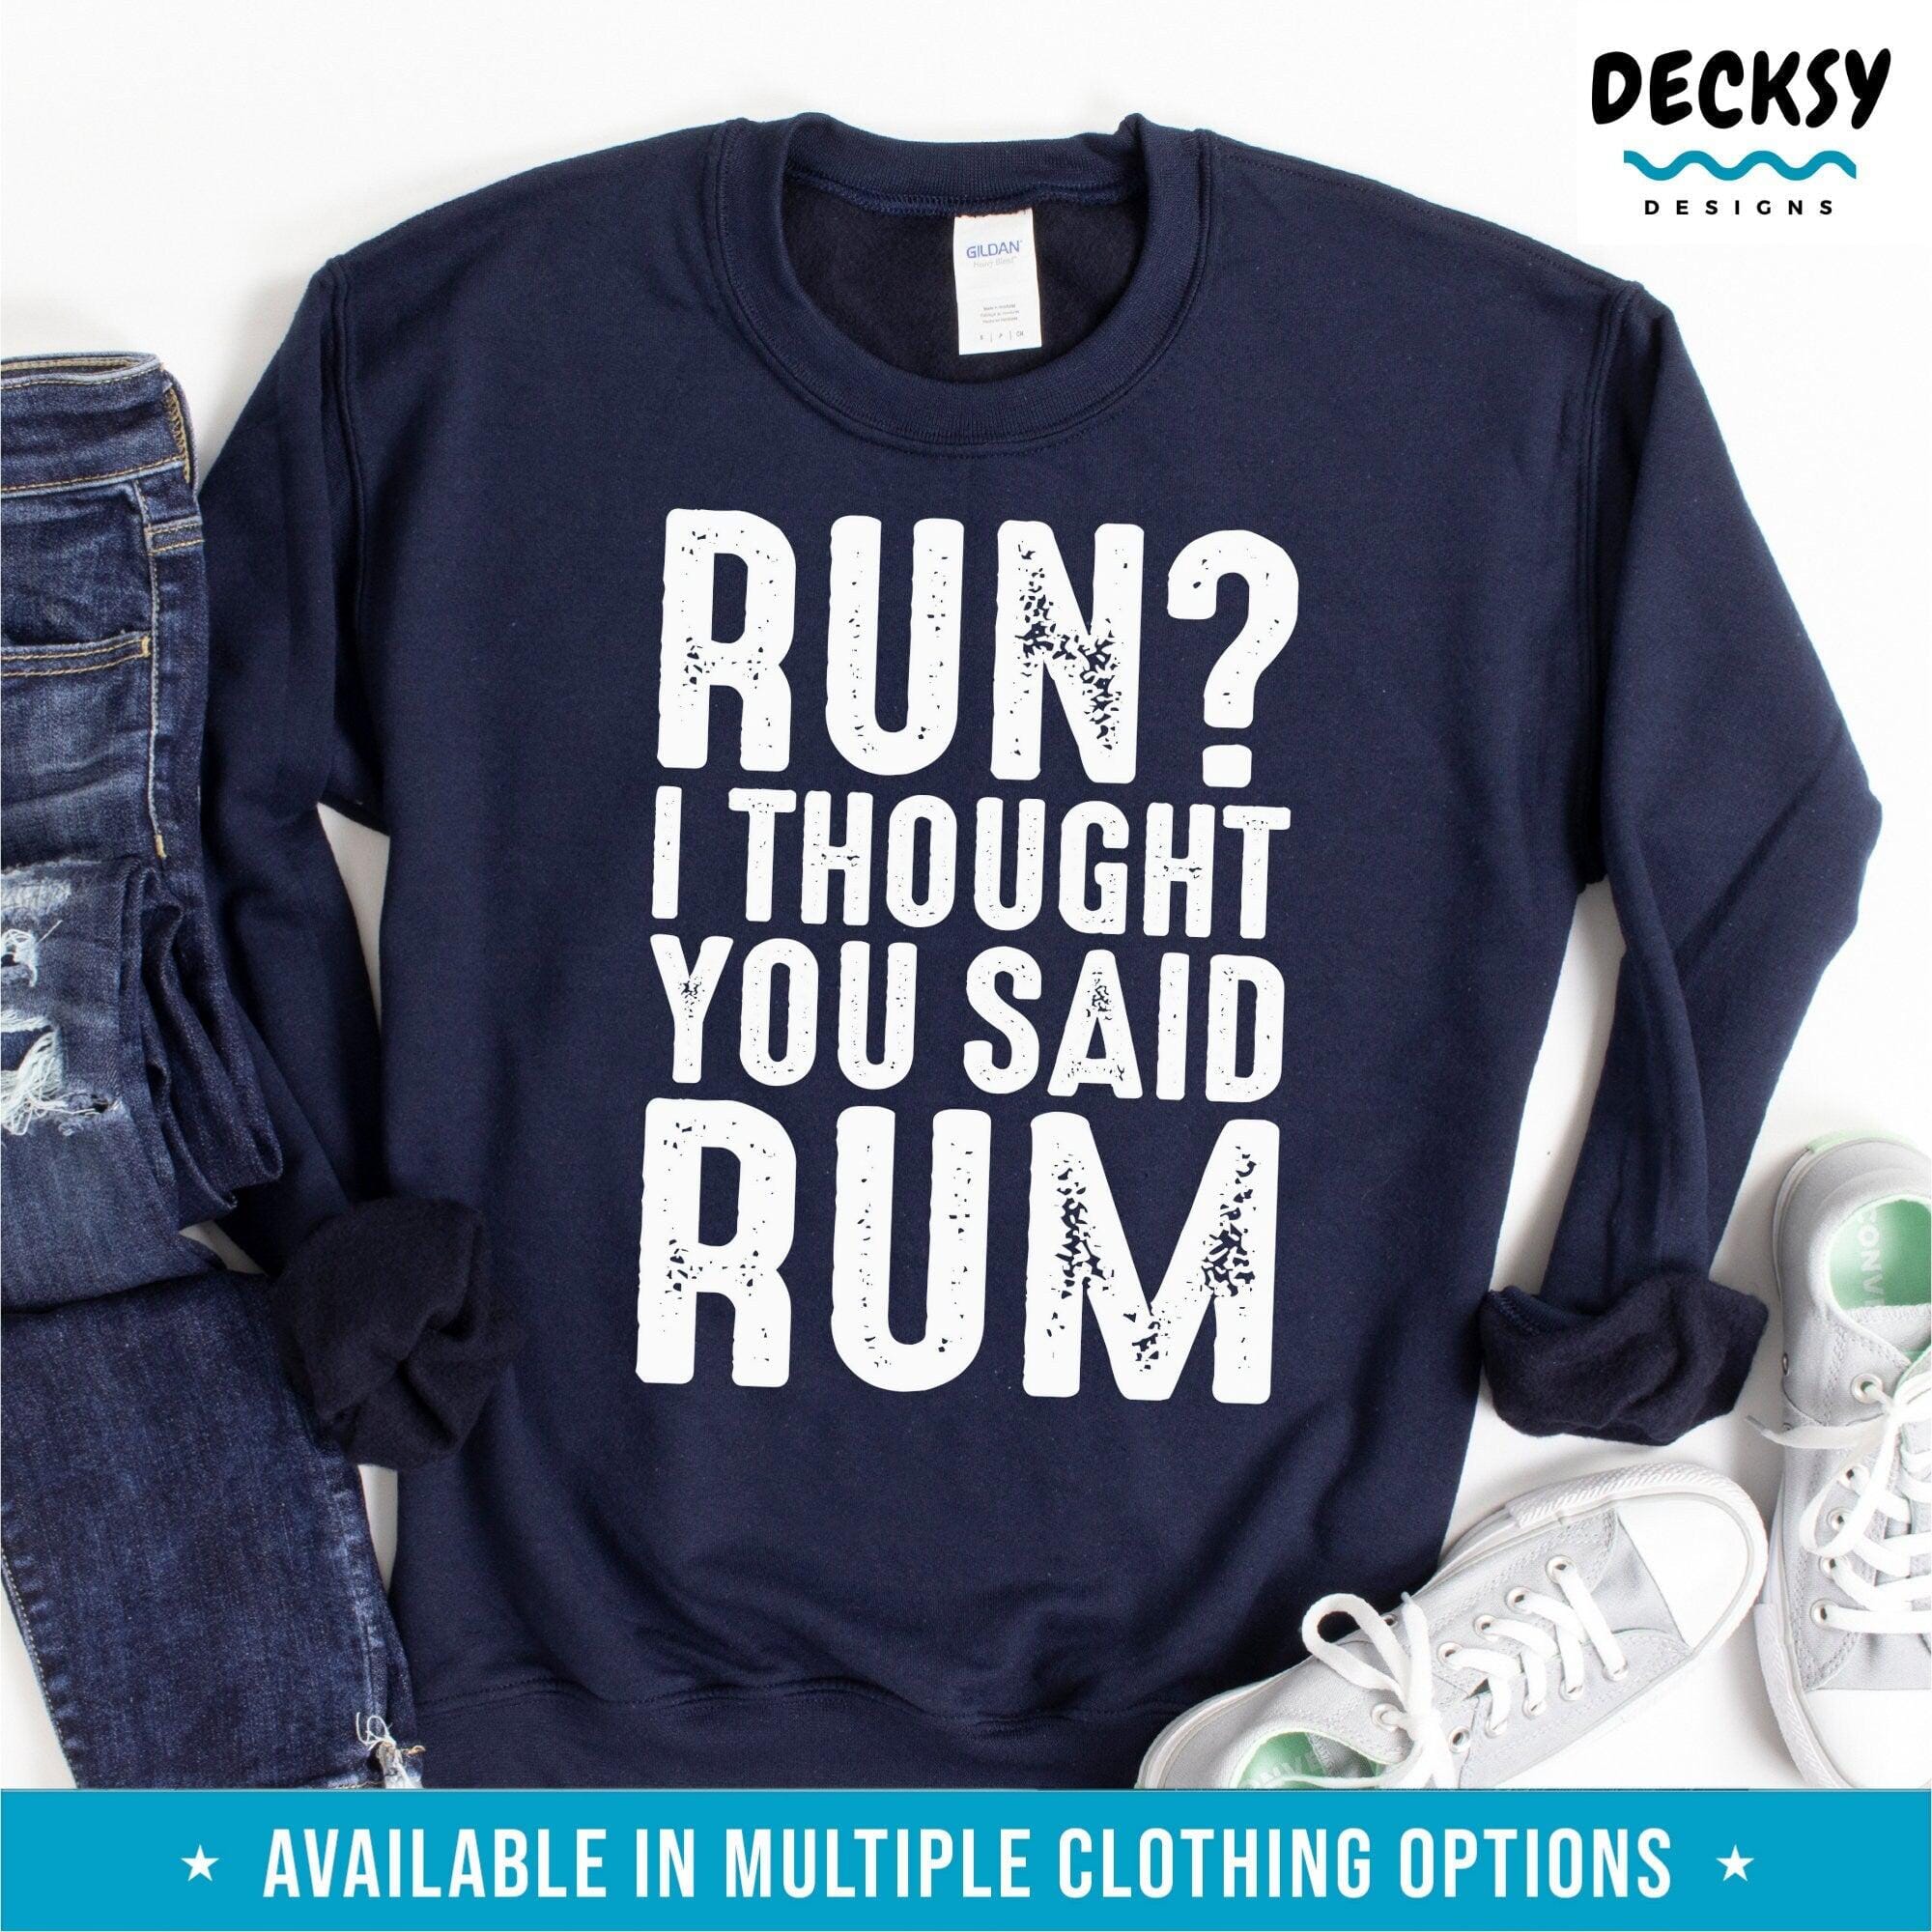 Running Shirt, Workout Gift-Clothing:Gender-Neutral Adult Clothing:Tops & Tees:T-shirts:Graphic Tees-DecksyDesigns